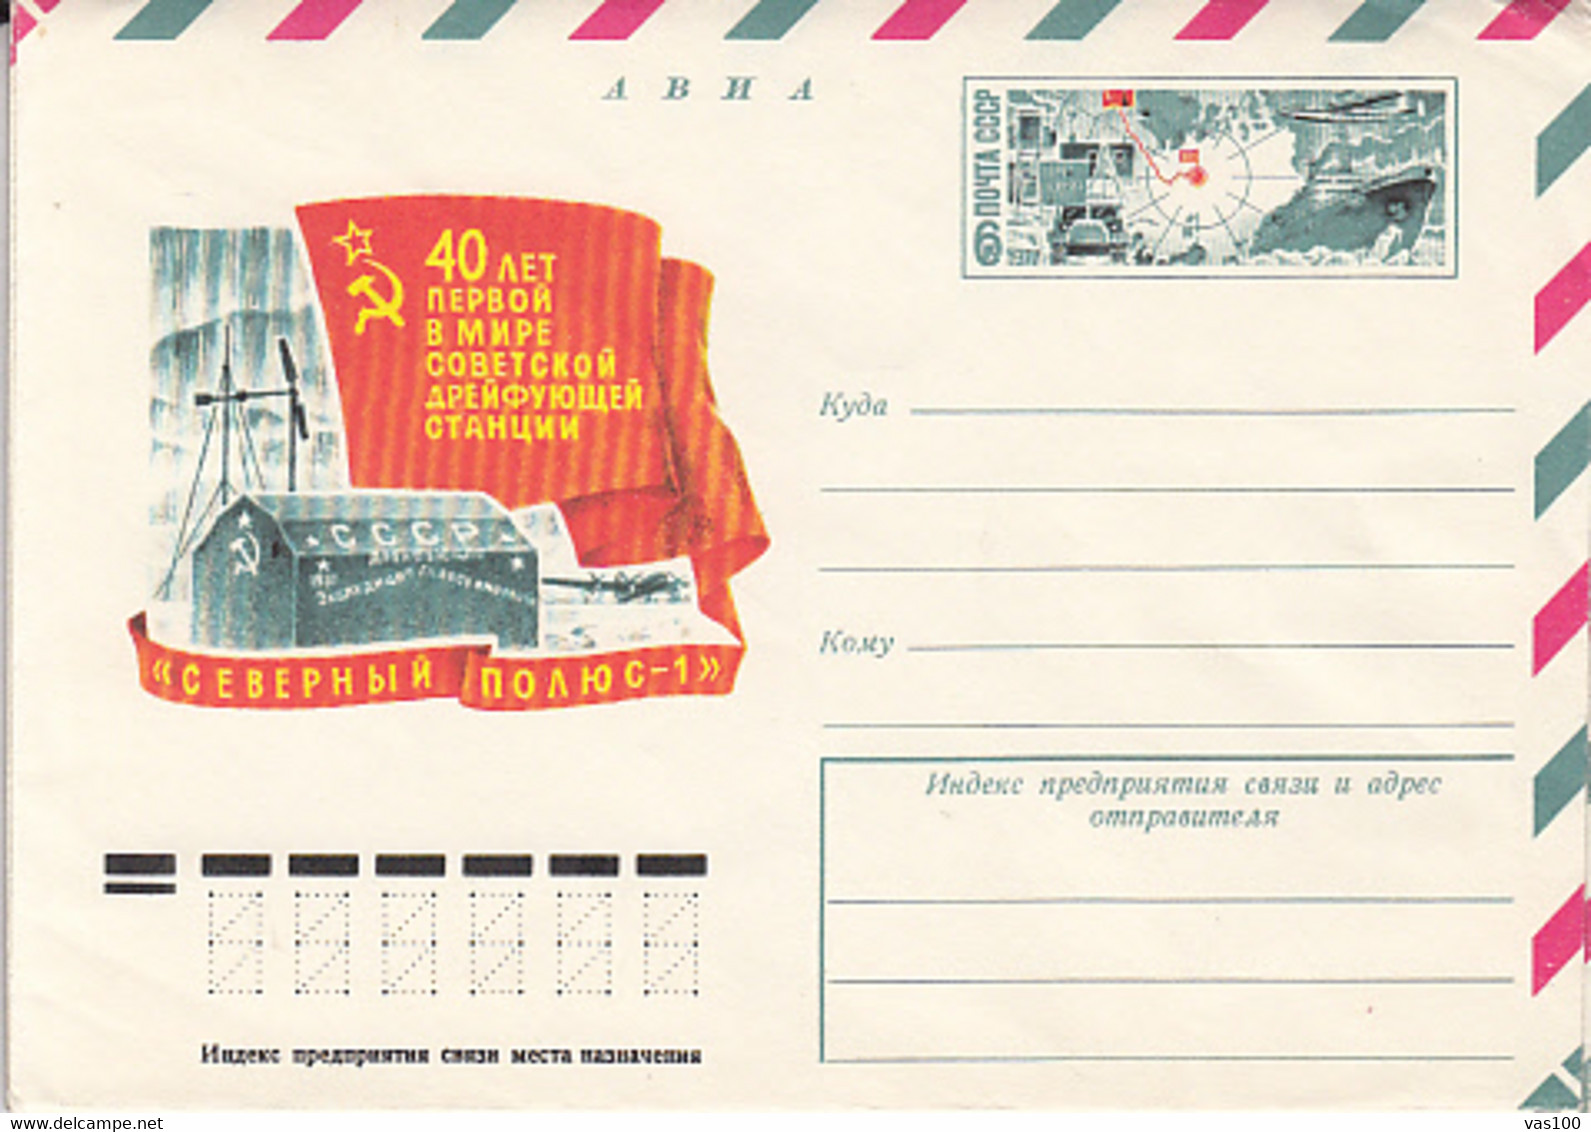 NORTH POLE, ARCTIC STATIONS, NORTH POLE 1, COVER STATIONERY, ENTIER POSTAL, 1977, RUSSIA - Stations Scientifiques & Stations Dérivantes Arctiques